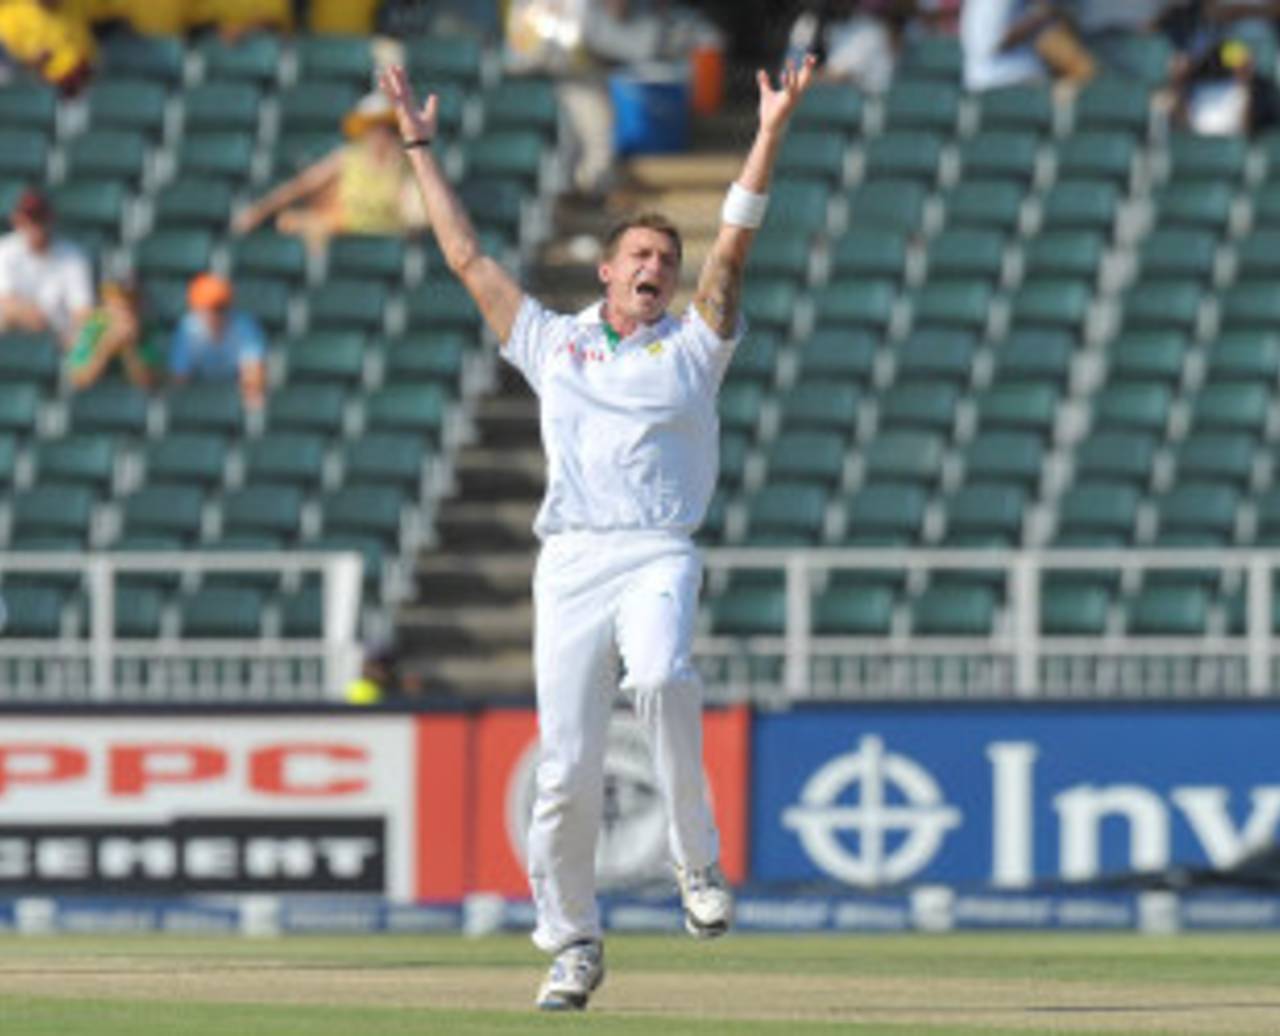 Dale Steyn appeals successfully for the wicket of Usman Khawaja, South Africa v Australia, 2nd Test, Johannesburg, 2nd day, November 18, 2011